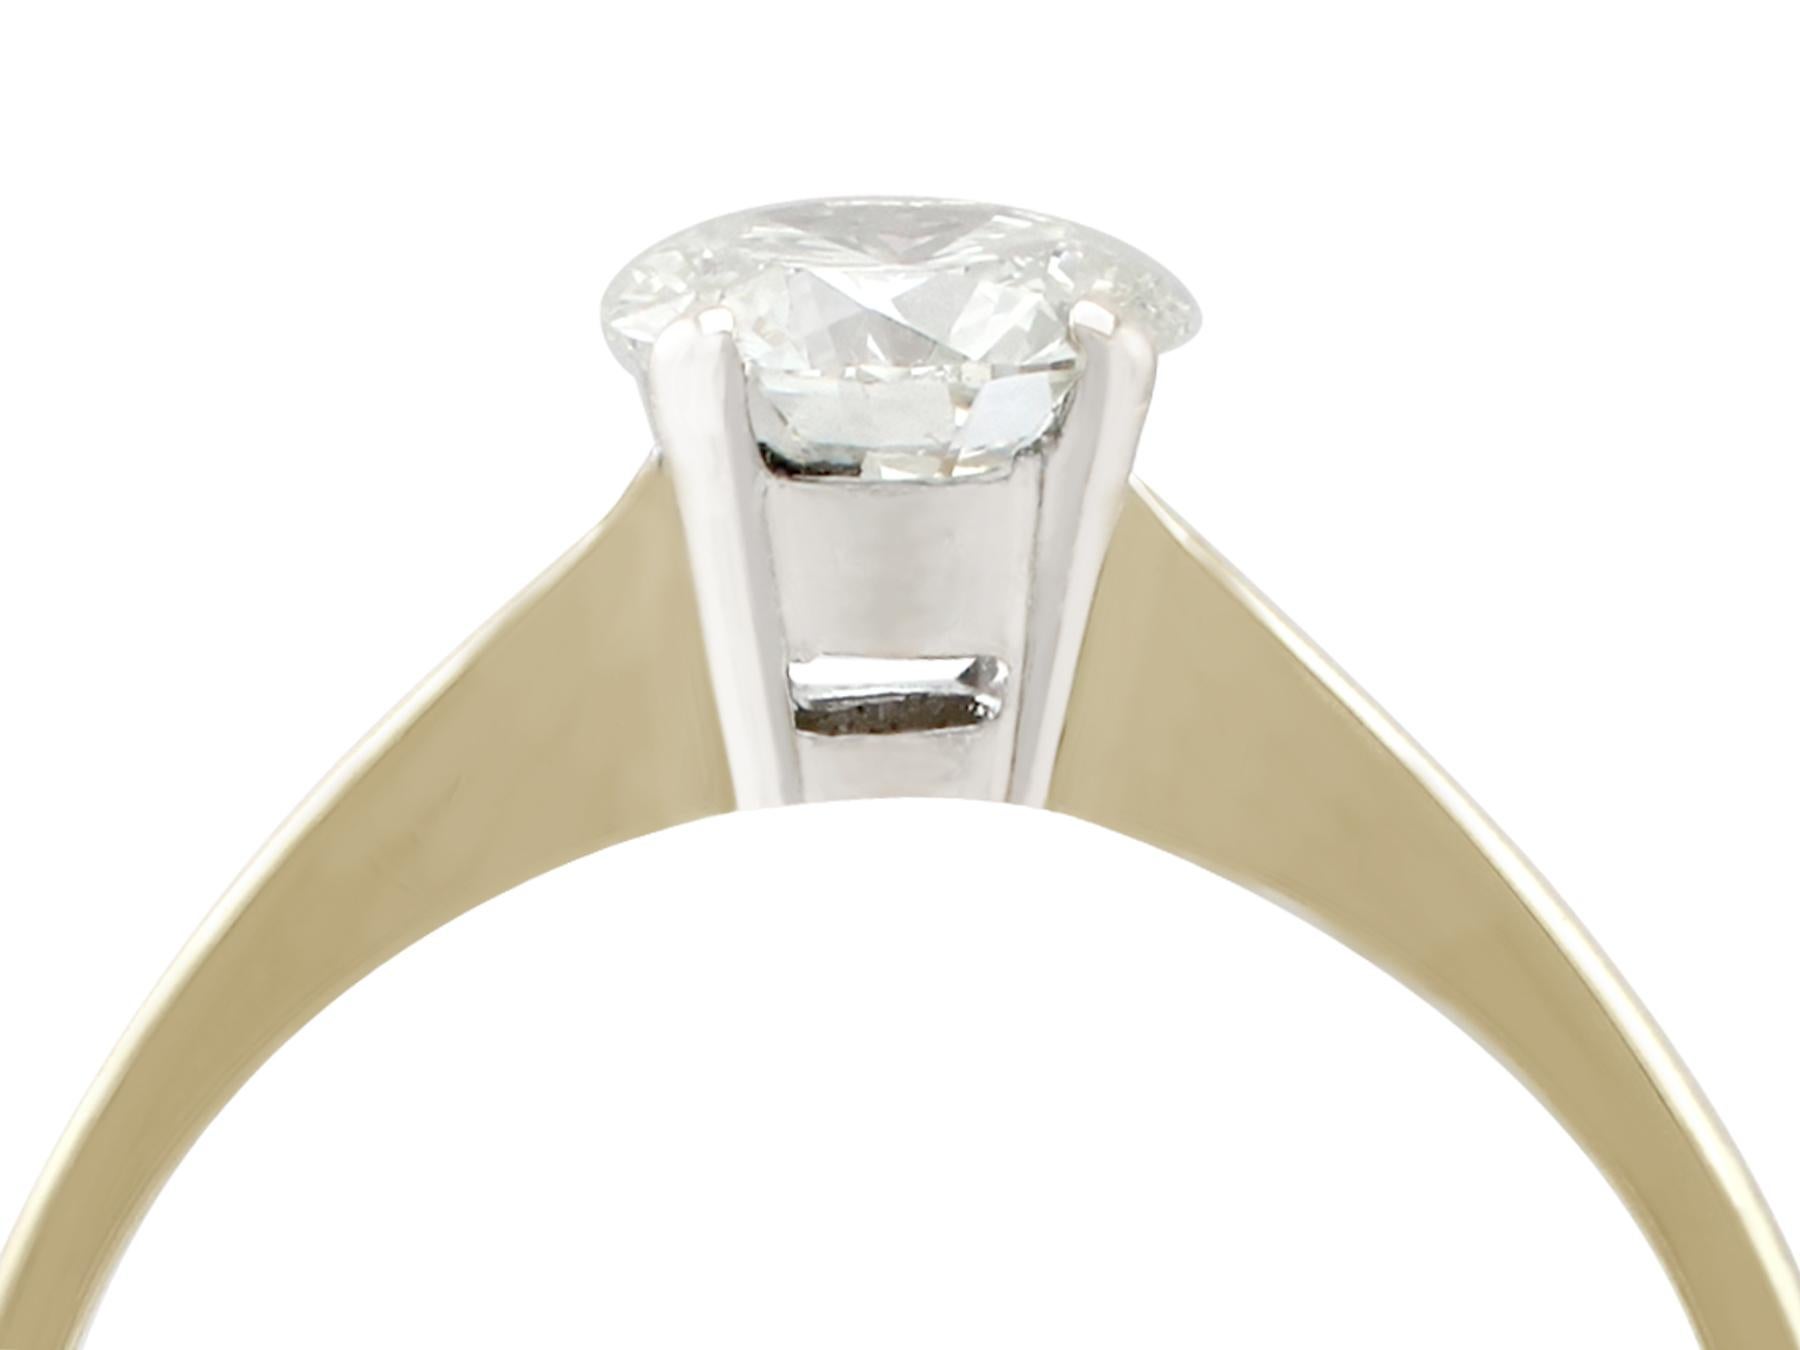 An impressive contemporary 0.61 carat diamond and 18 carat yellow gold, 18 karat white gold set solitaire ring; part of our diverse diamond jewellery collections.

This fine and impressive diamond solitaire ring has been crafted in 18k yellow gold